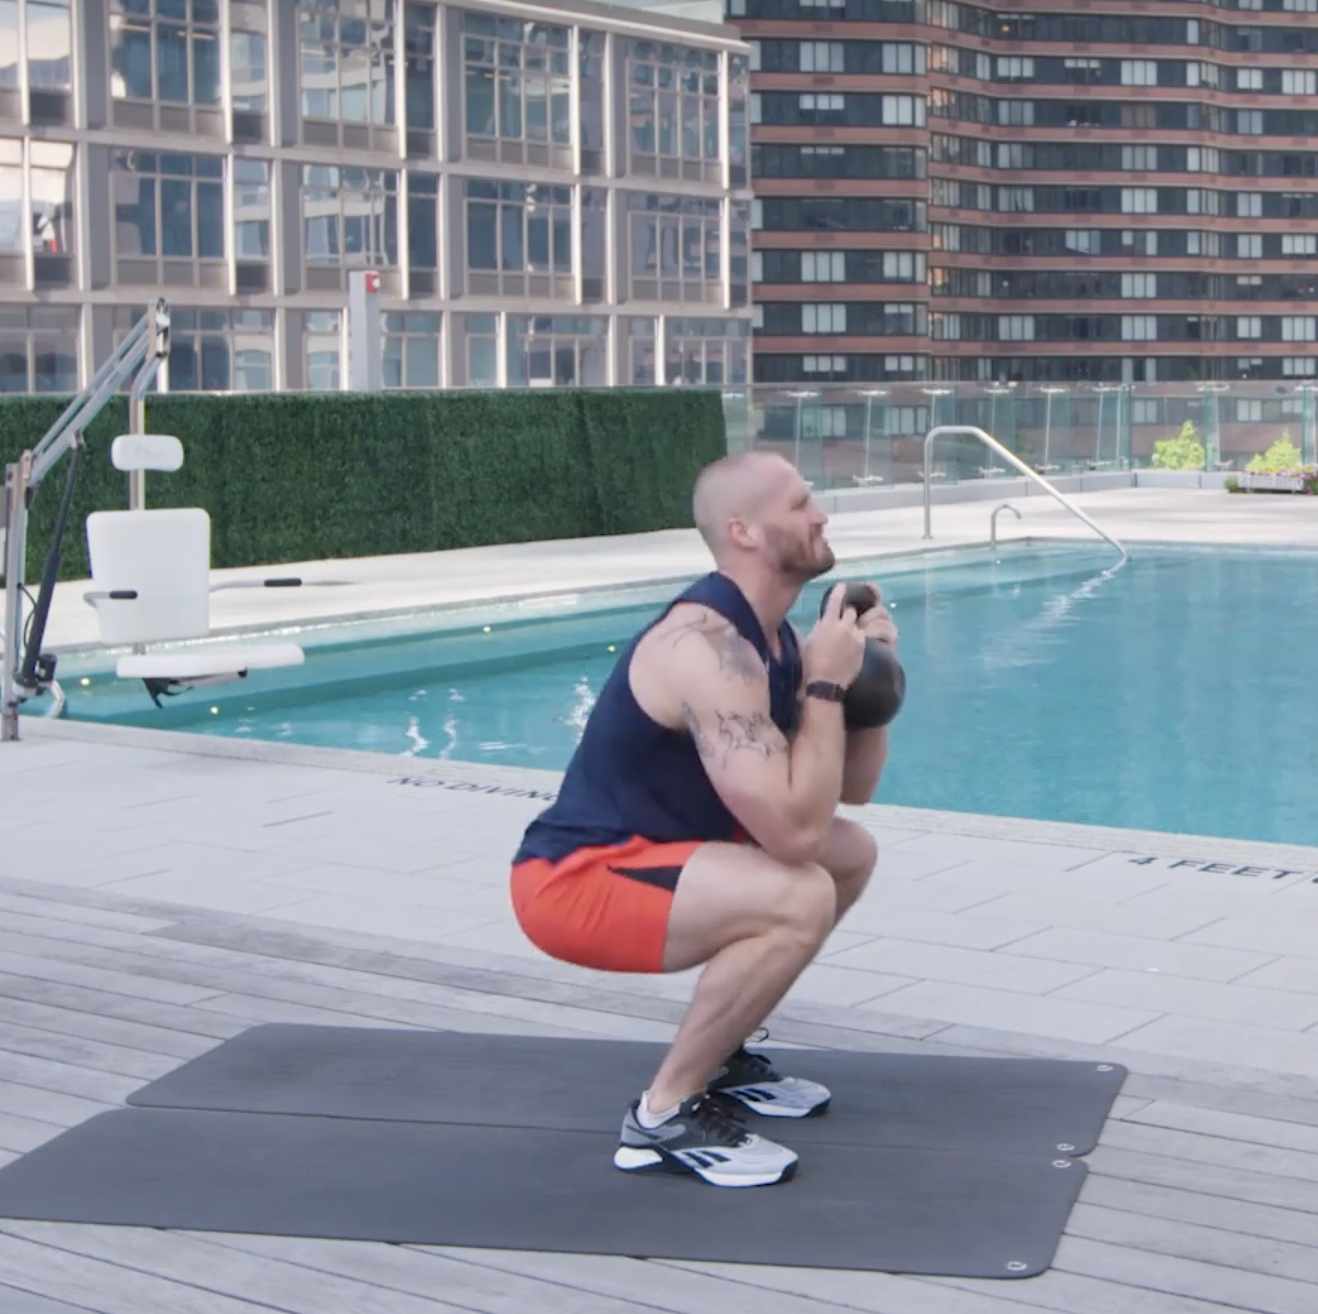 This 5-Minute Full-Body Kettlebell Complex Workout Will Push You to the Limit